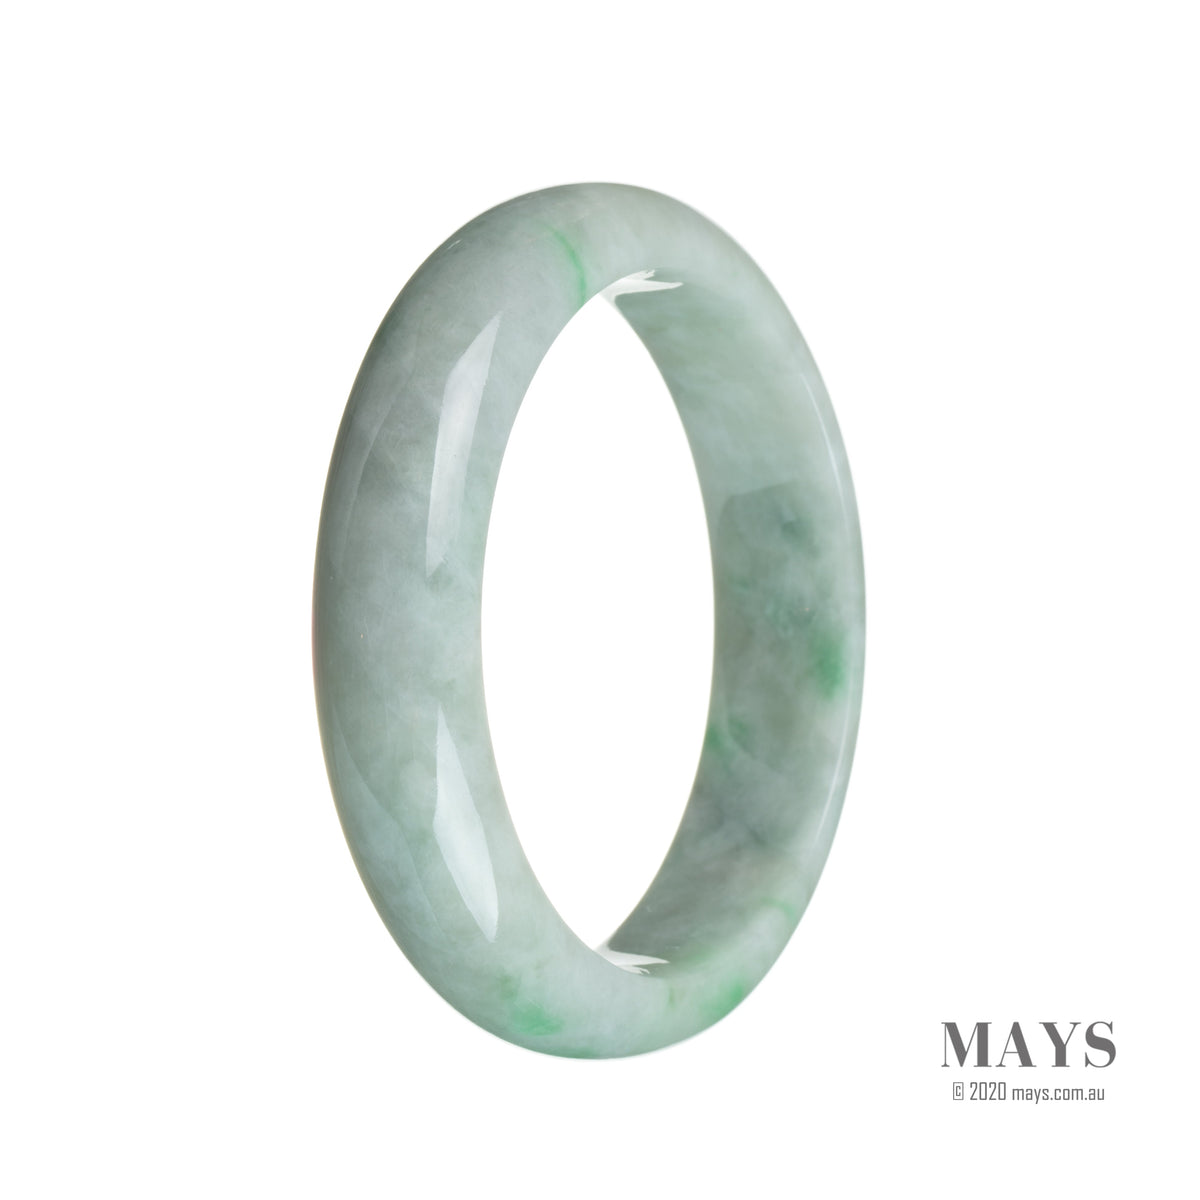 A close-up image of an authentic Grade A Burmese jade bangle bracelet. The bracelet features a beautiful green color with white accents and has a half moon shape. It measures 58mm in diameter. Perfect for adding a touch of elegance to any outfit.